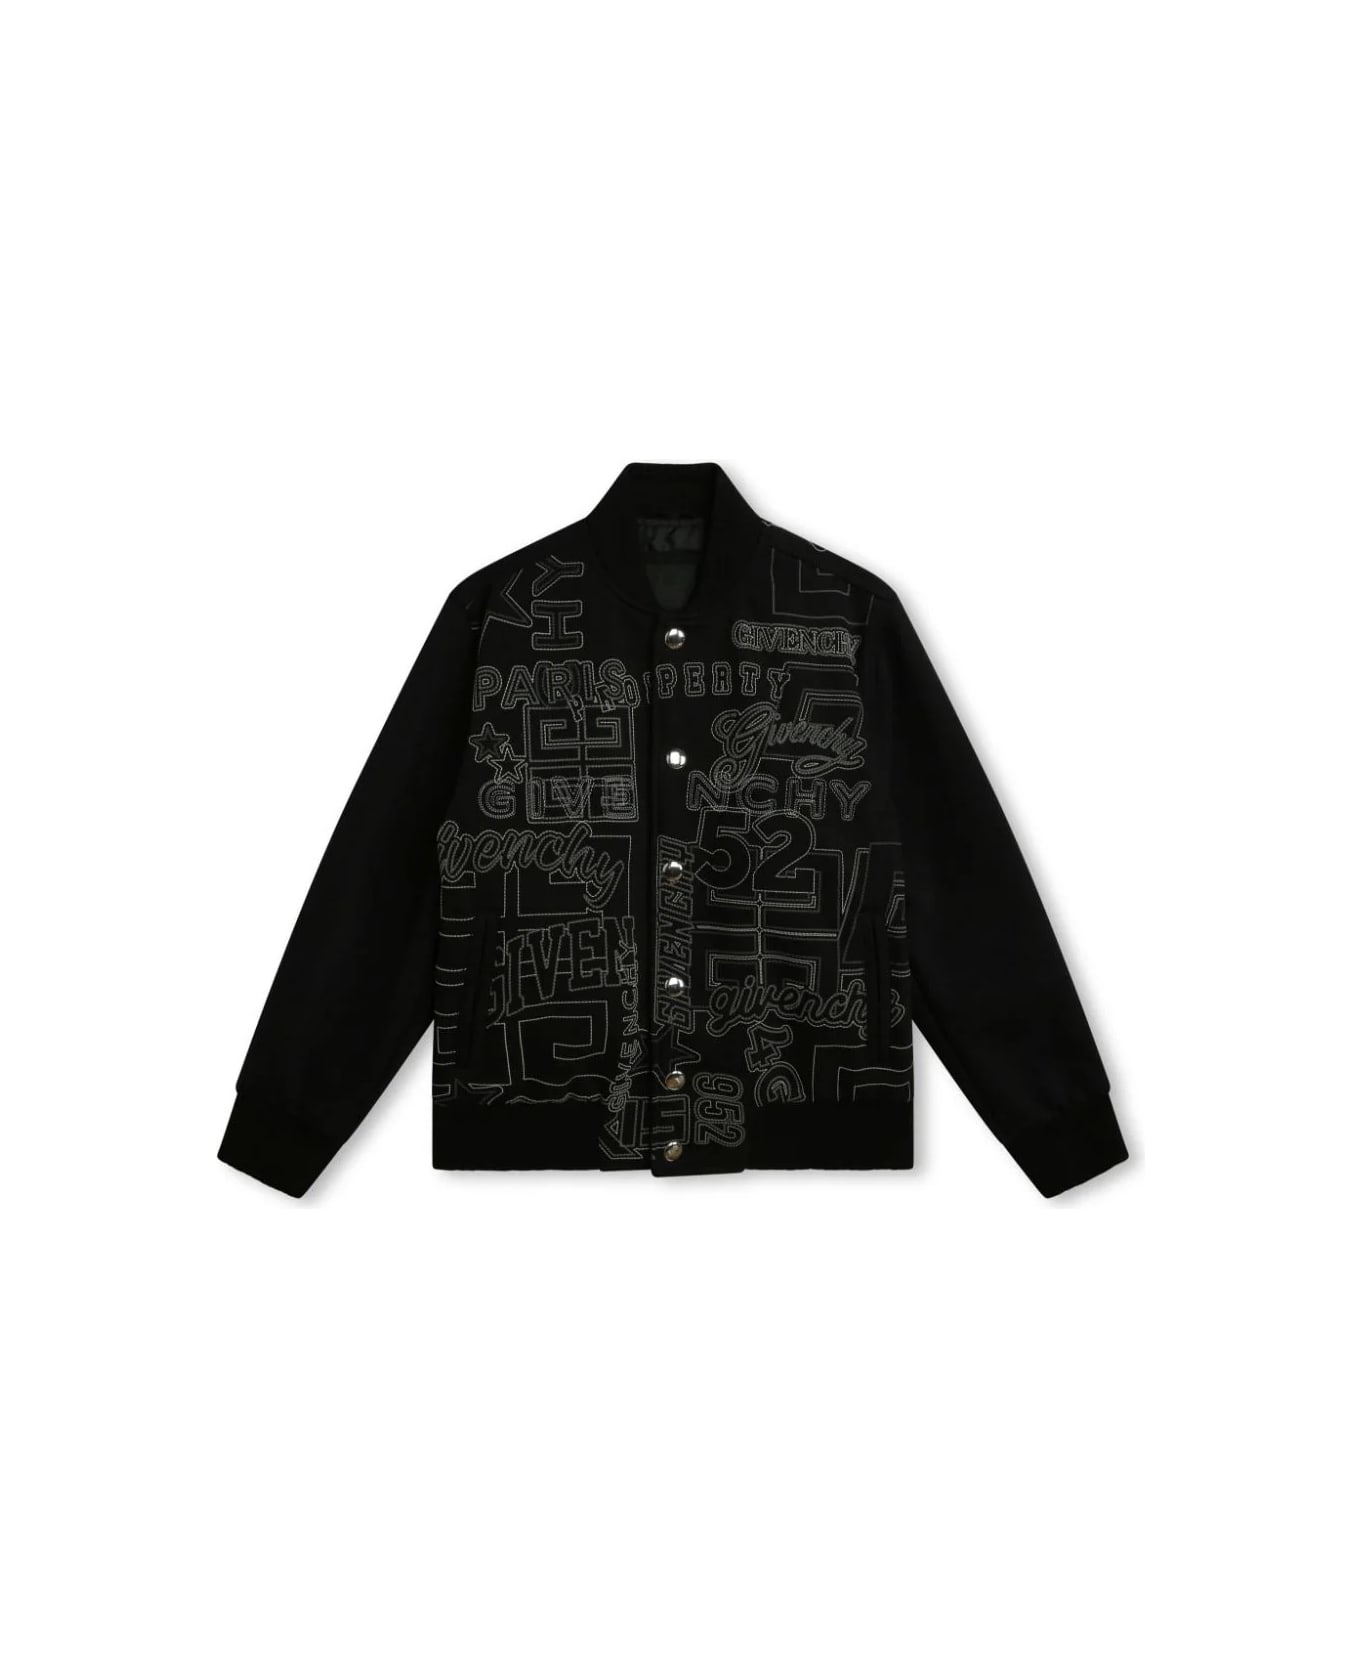 Givenchy Black Bomber Jacket With All-over Embroidery - Black